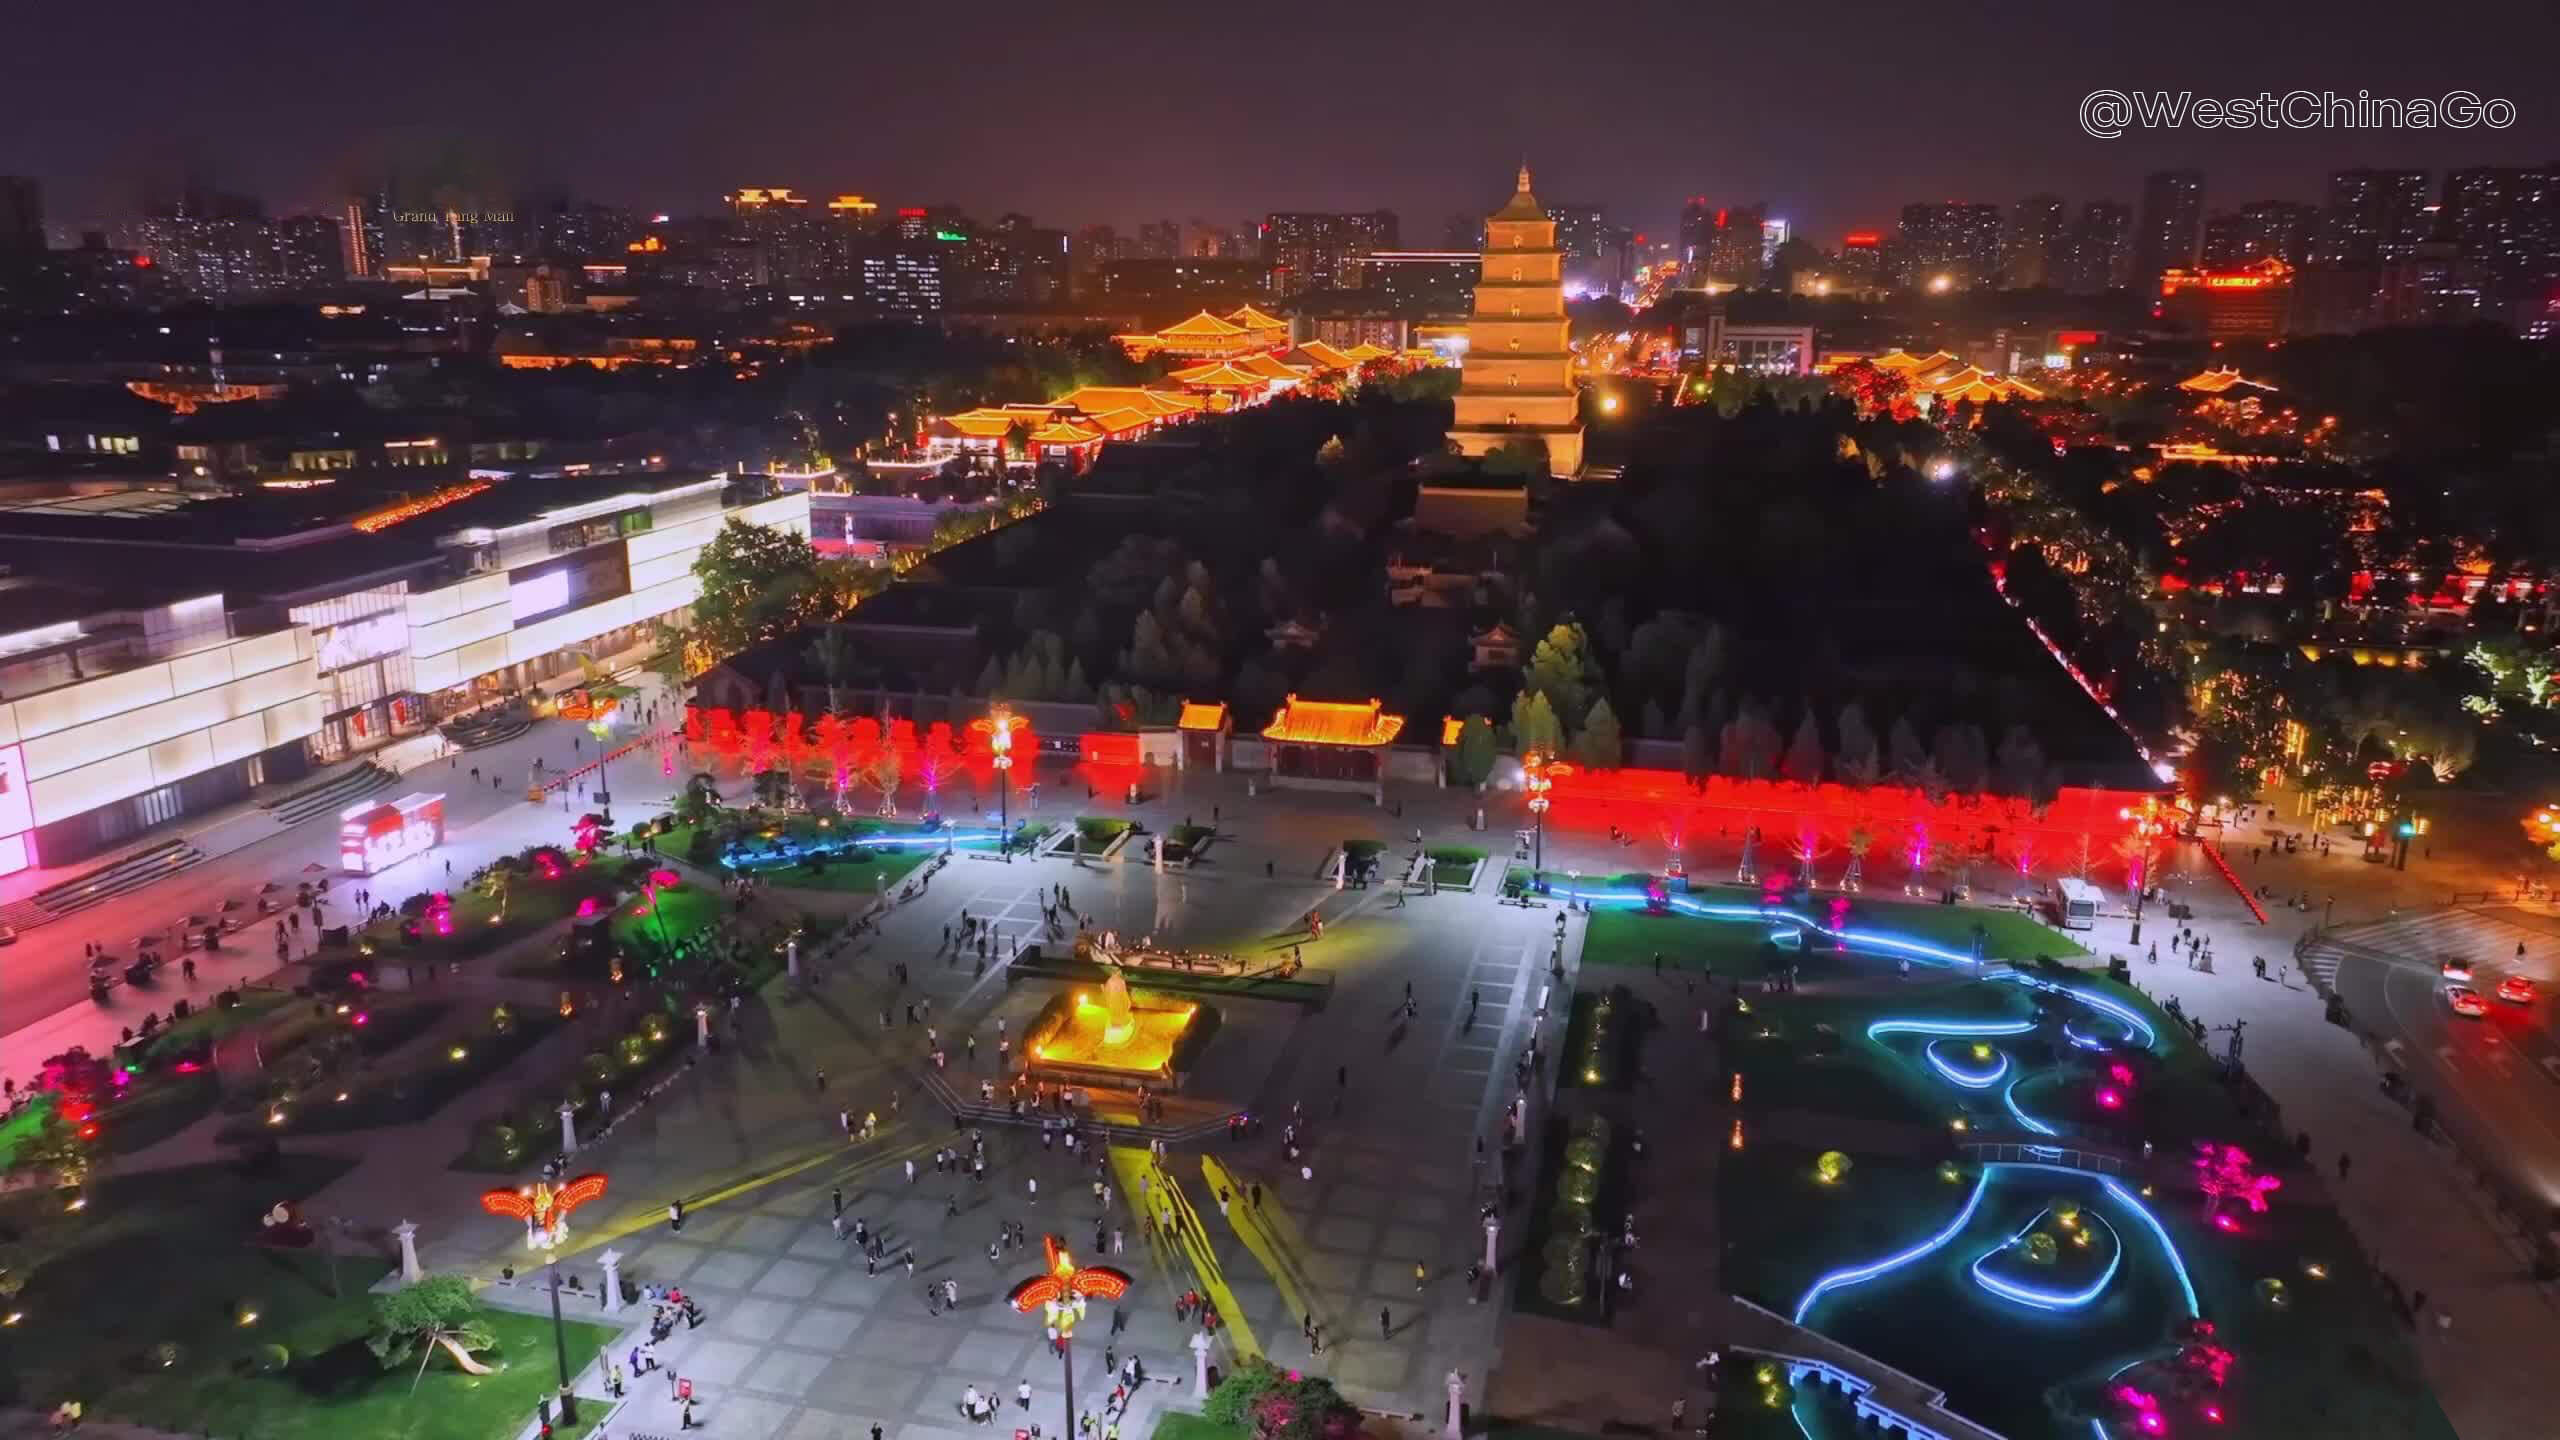 Xi'an Tang Dynasty Everbright City